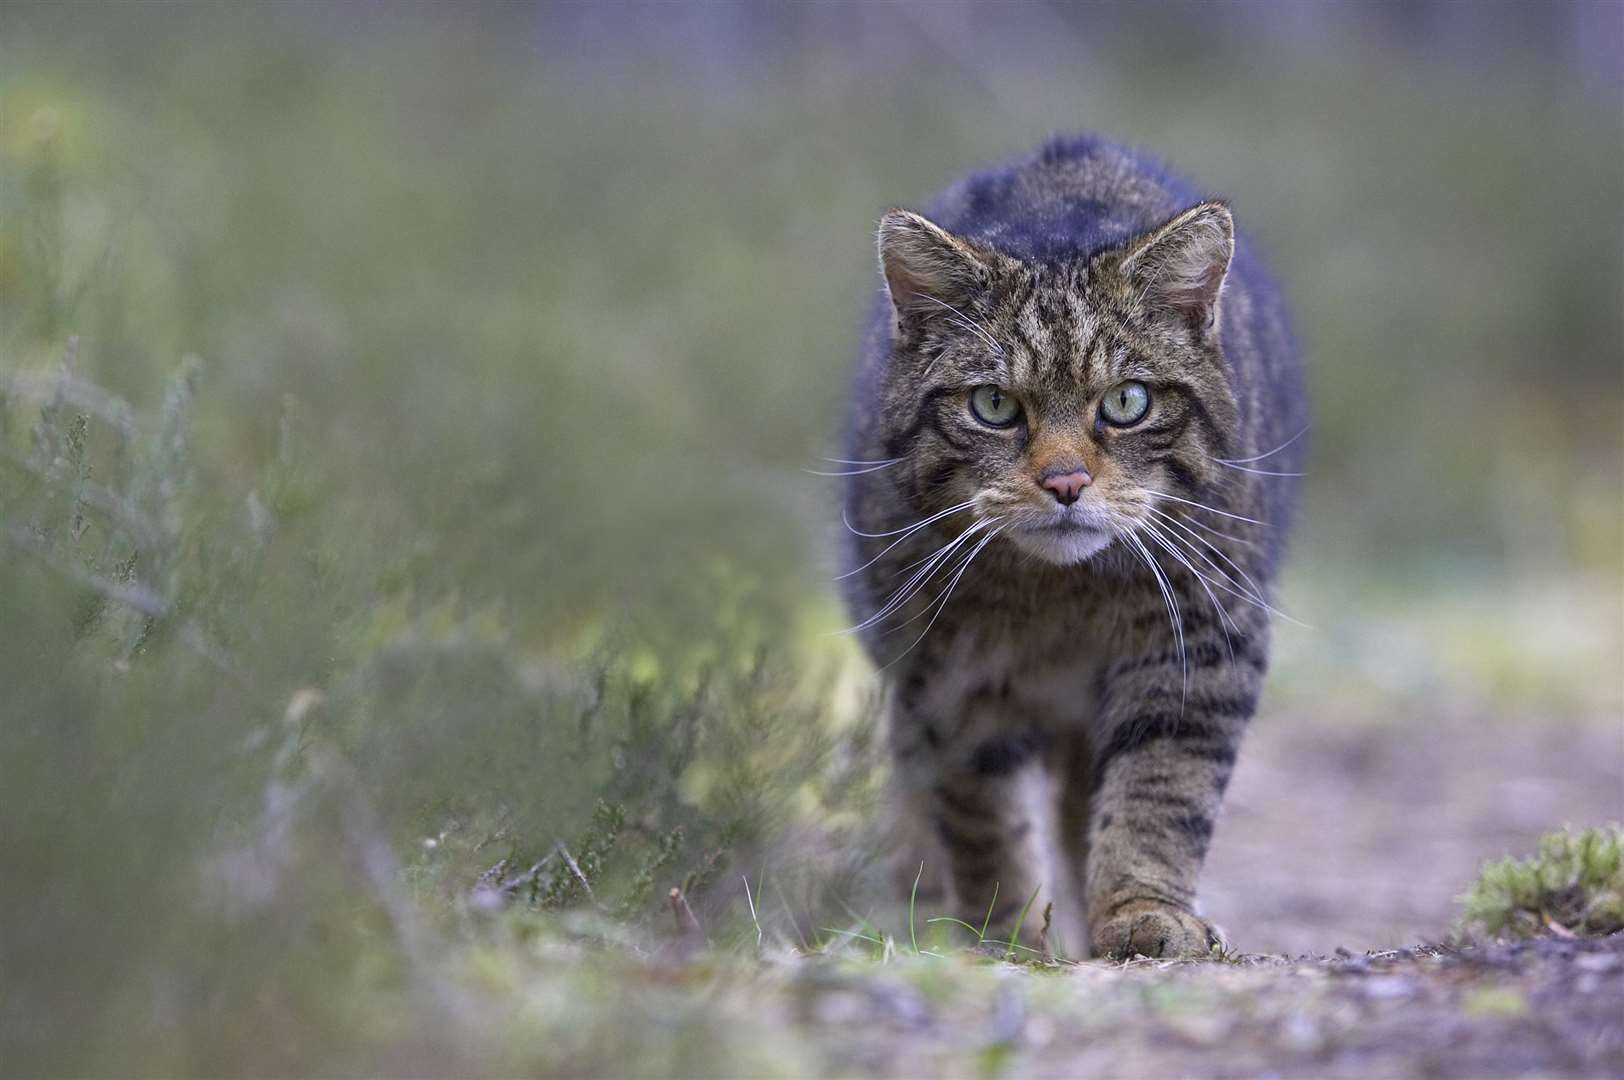 The sighting of a young wildcat has provided hope for those who feared them "functionally extinct".